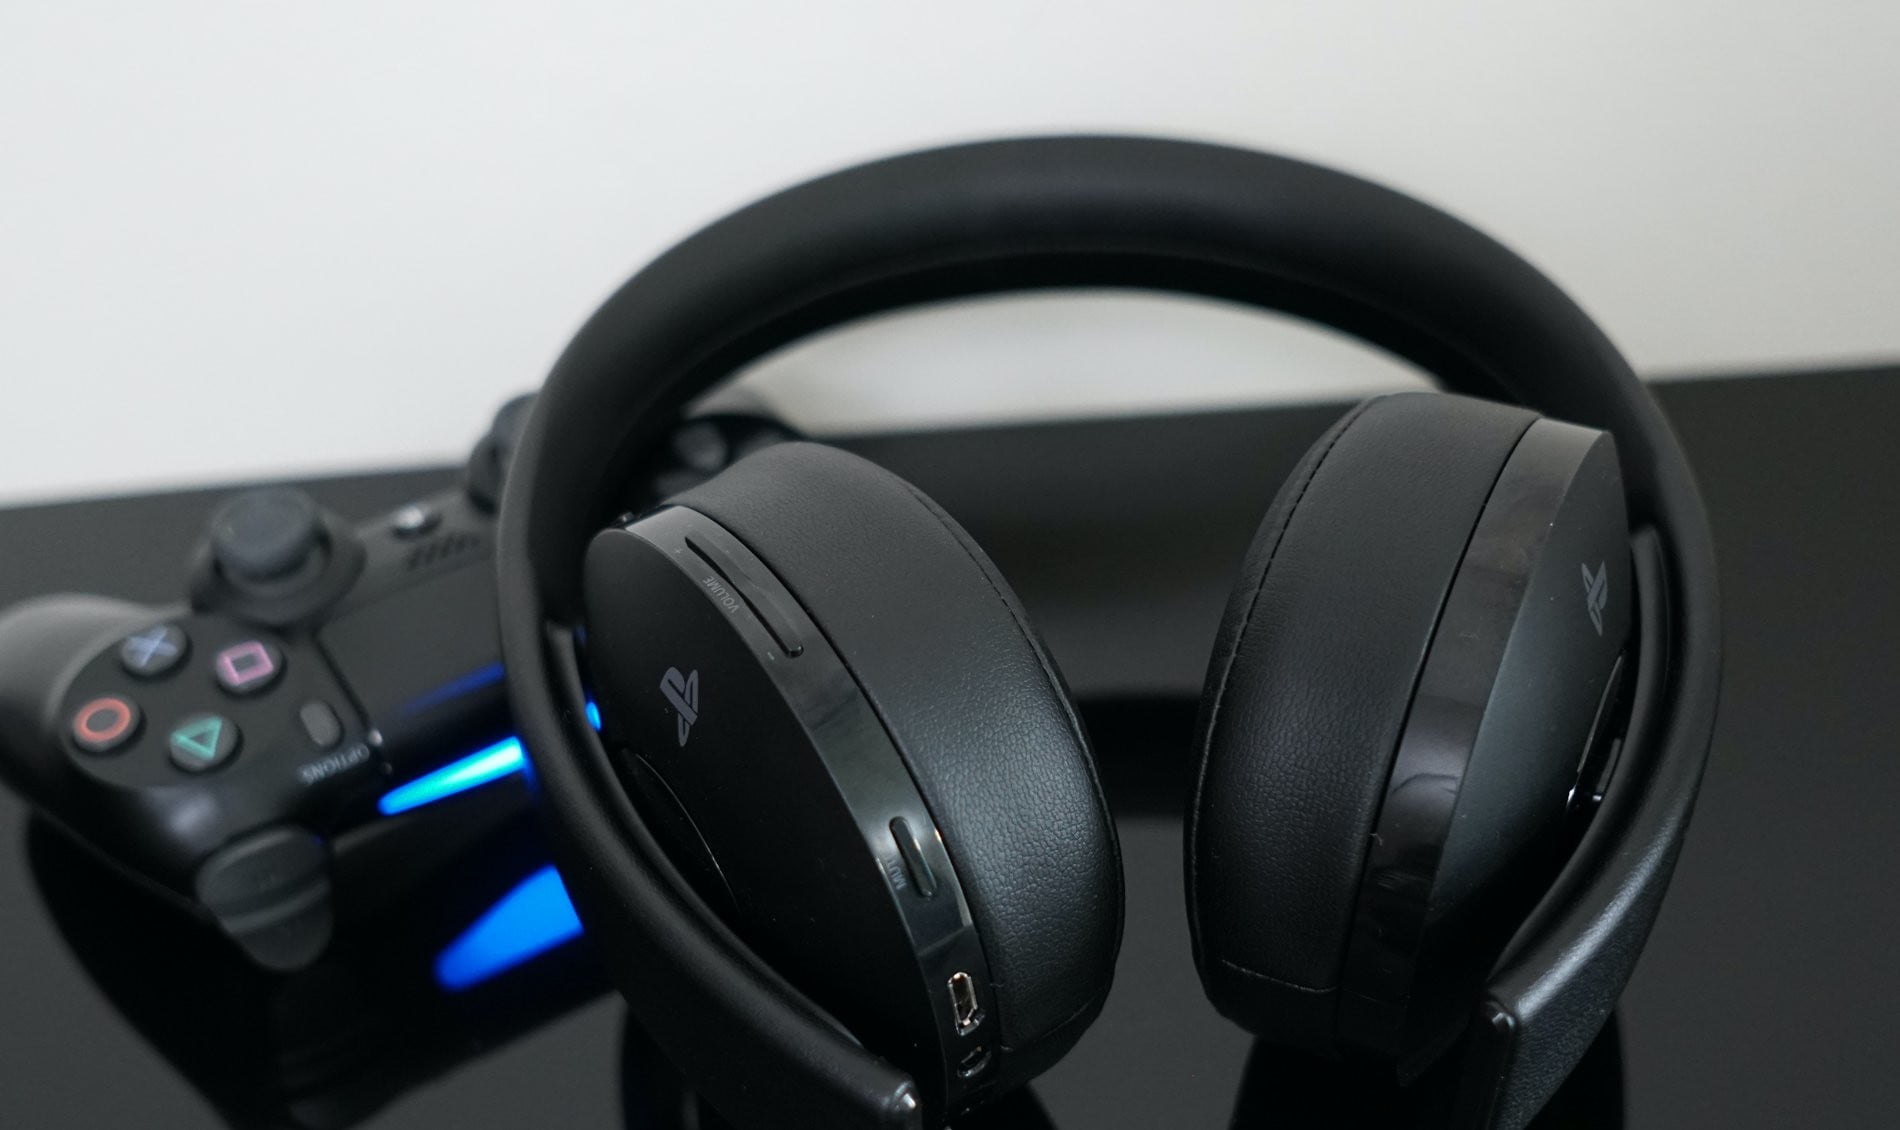 How To Connect Bluetooth Headphones to a PS4 Console?